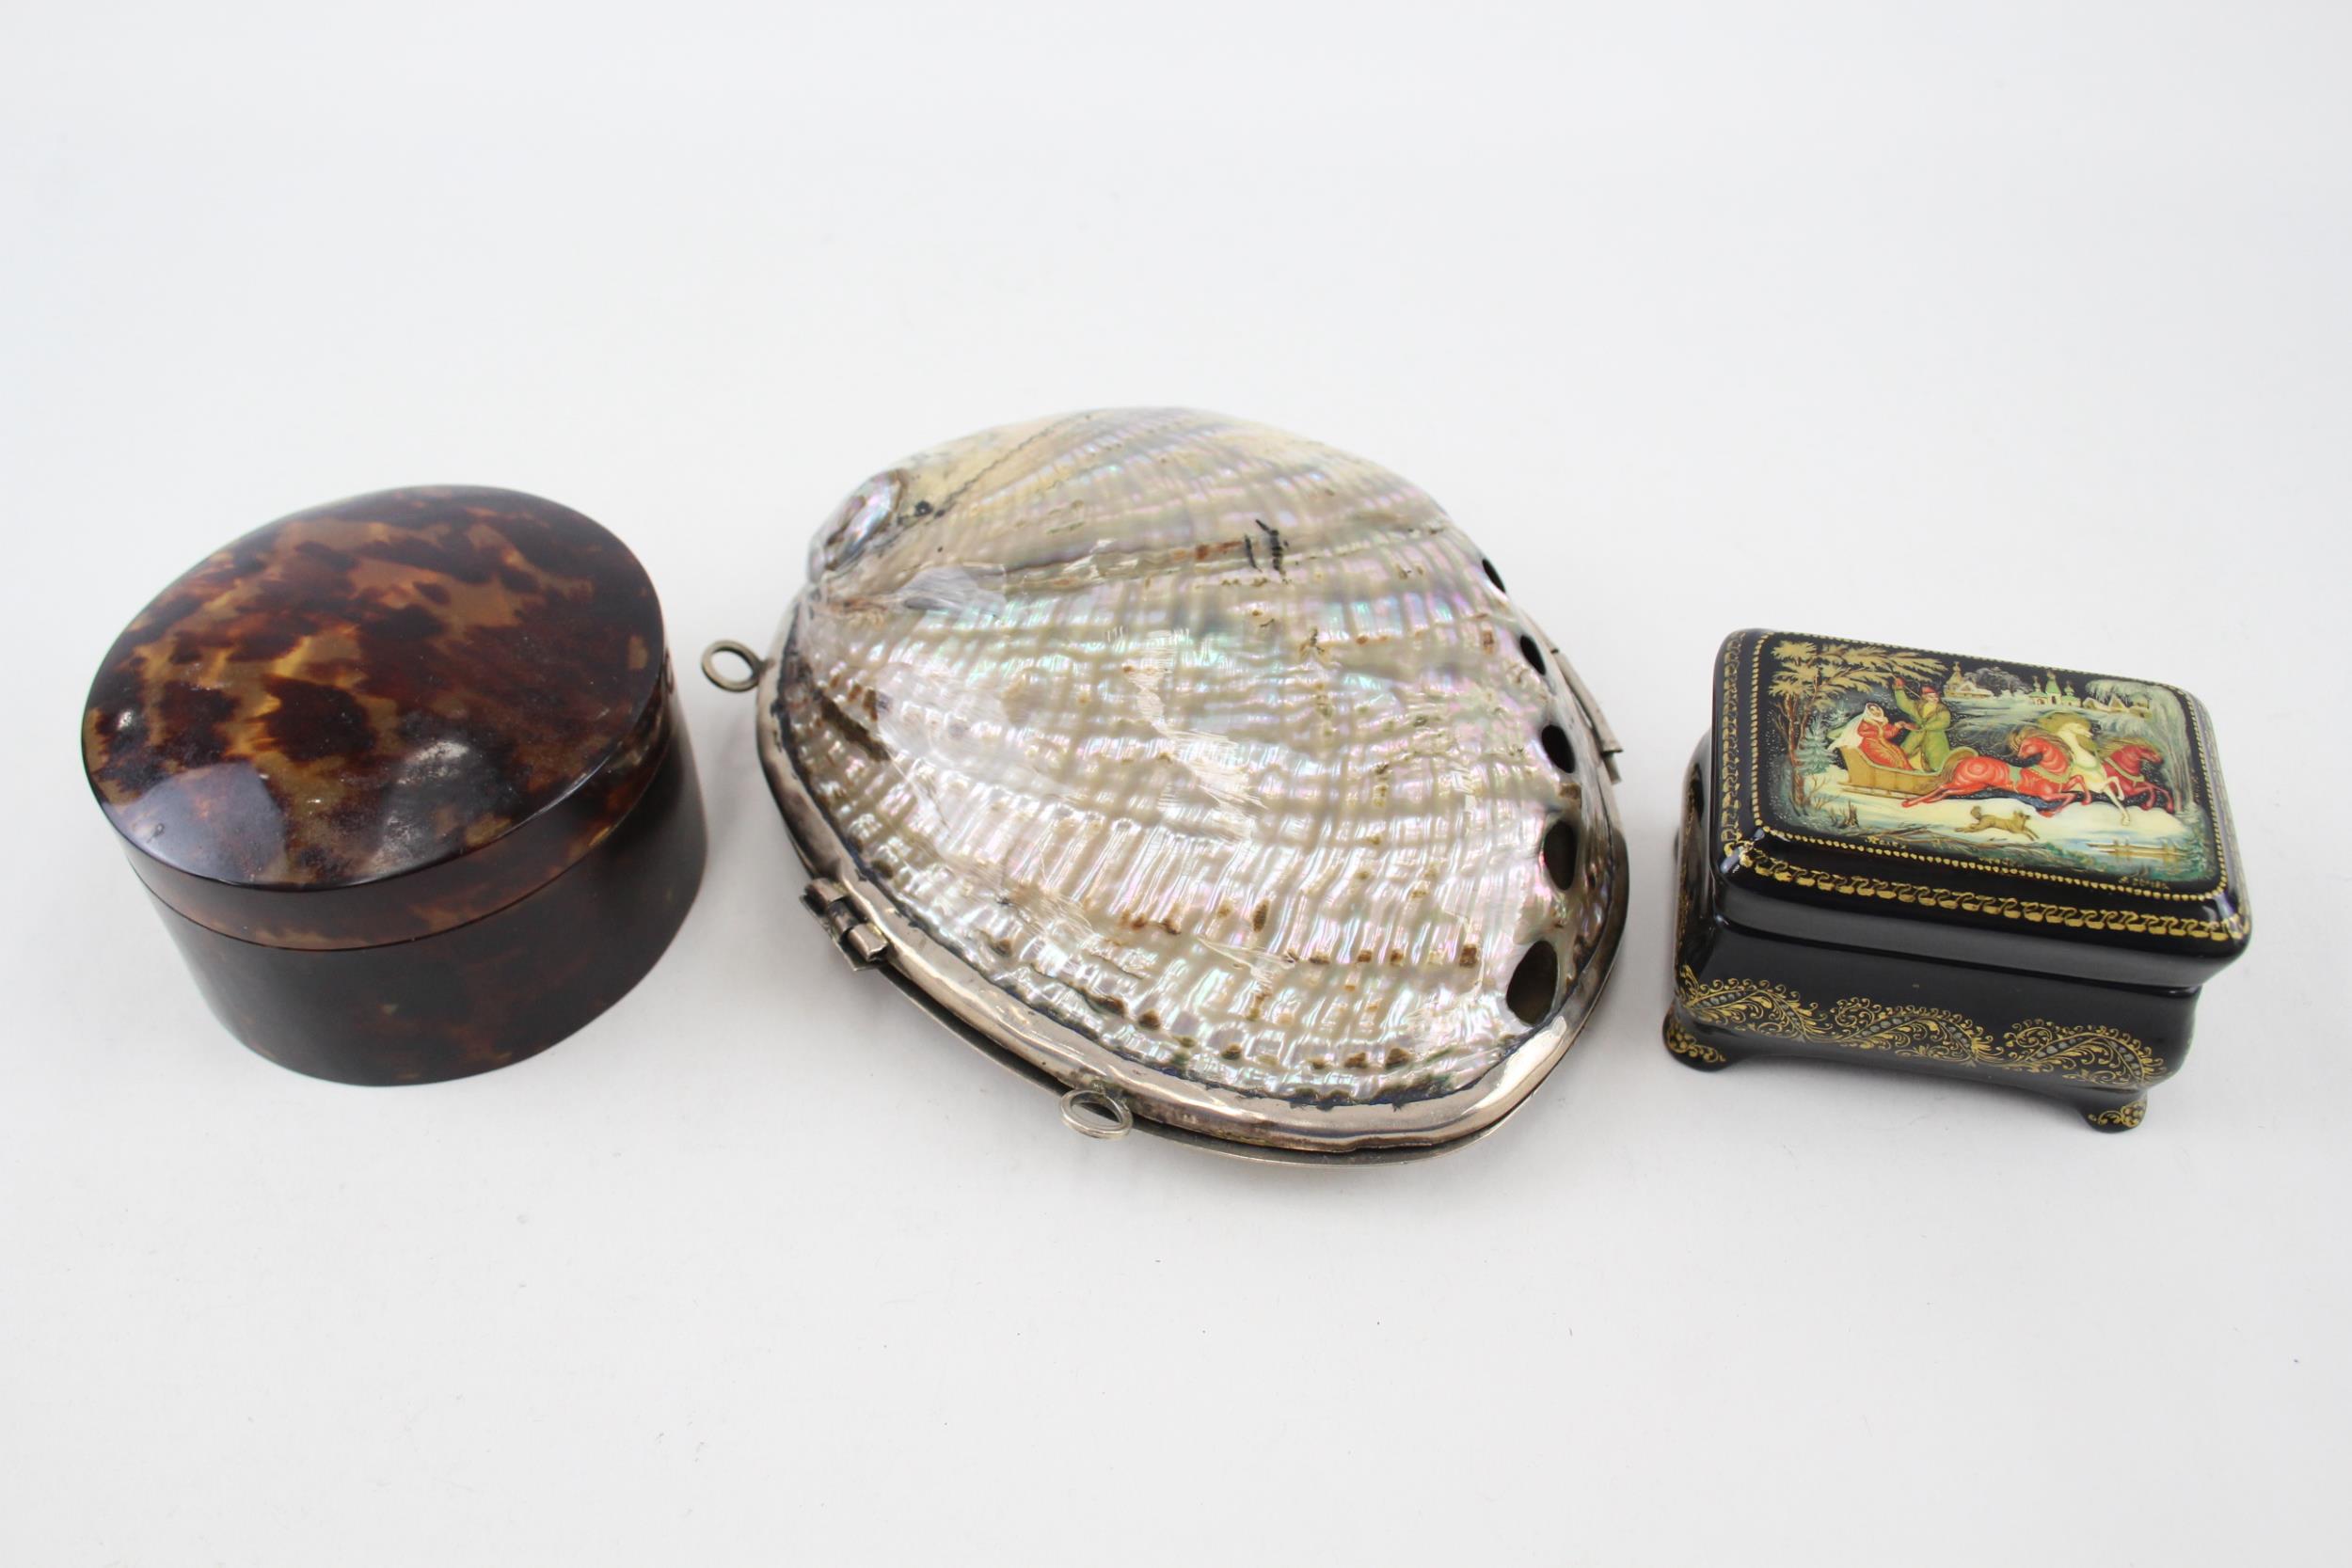 3 x Antique / Vintage TRINKET BOXES Inc Lacquer, Tortoiseshell, Abalone Shell - In antique / vintage